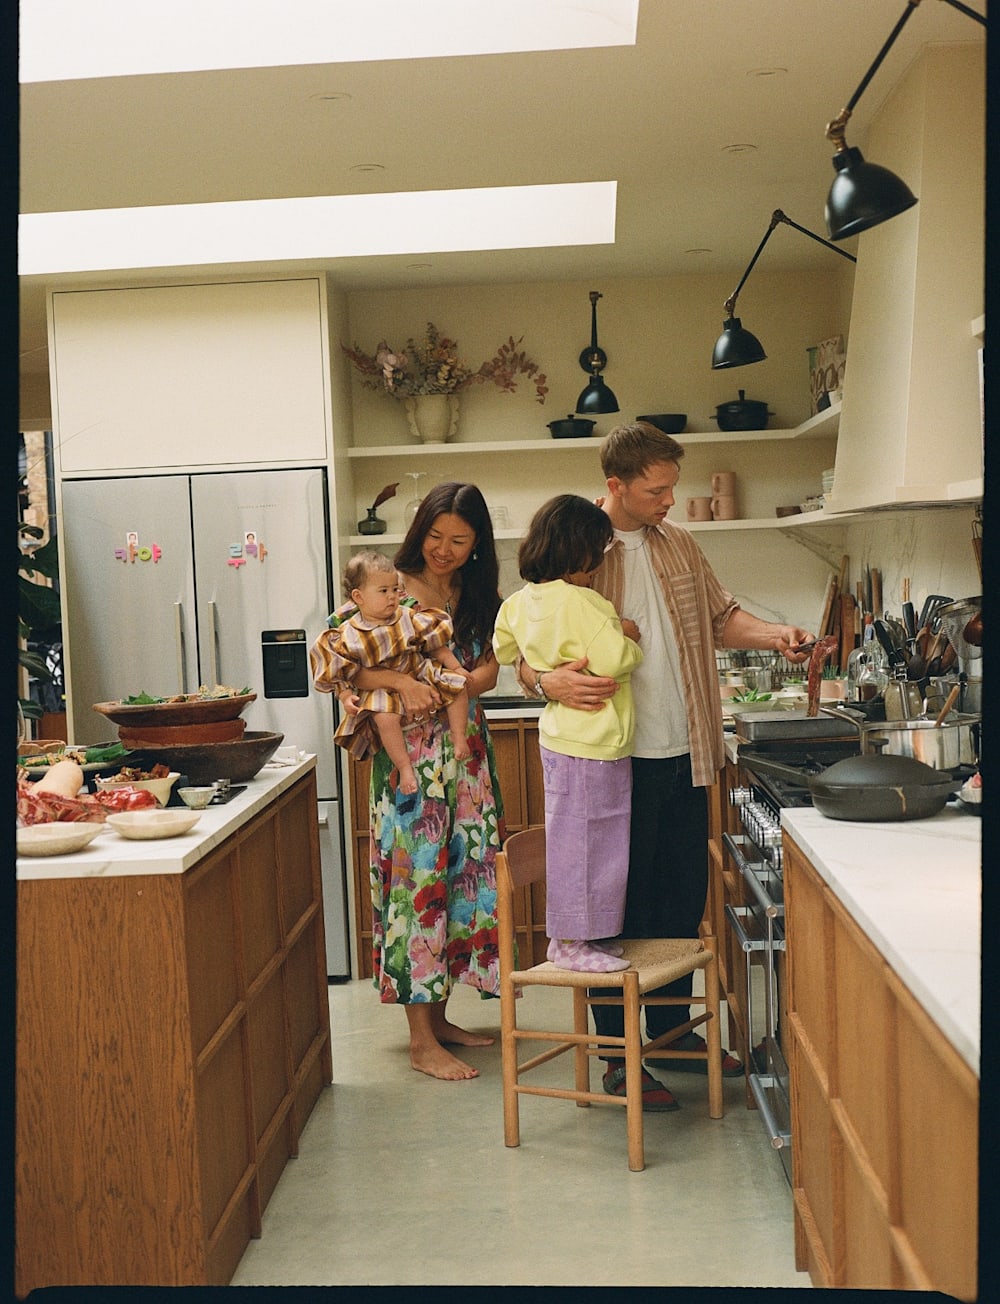 Rejina Pyo and Jordan Bourke in their kitchen, photographed by Lily Bertrand-Webb | Mr & Mrs Smith